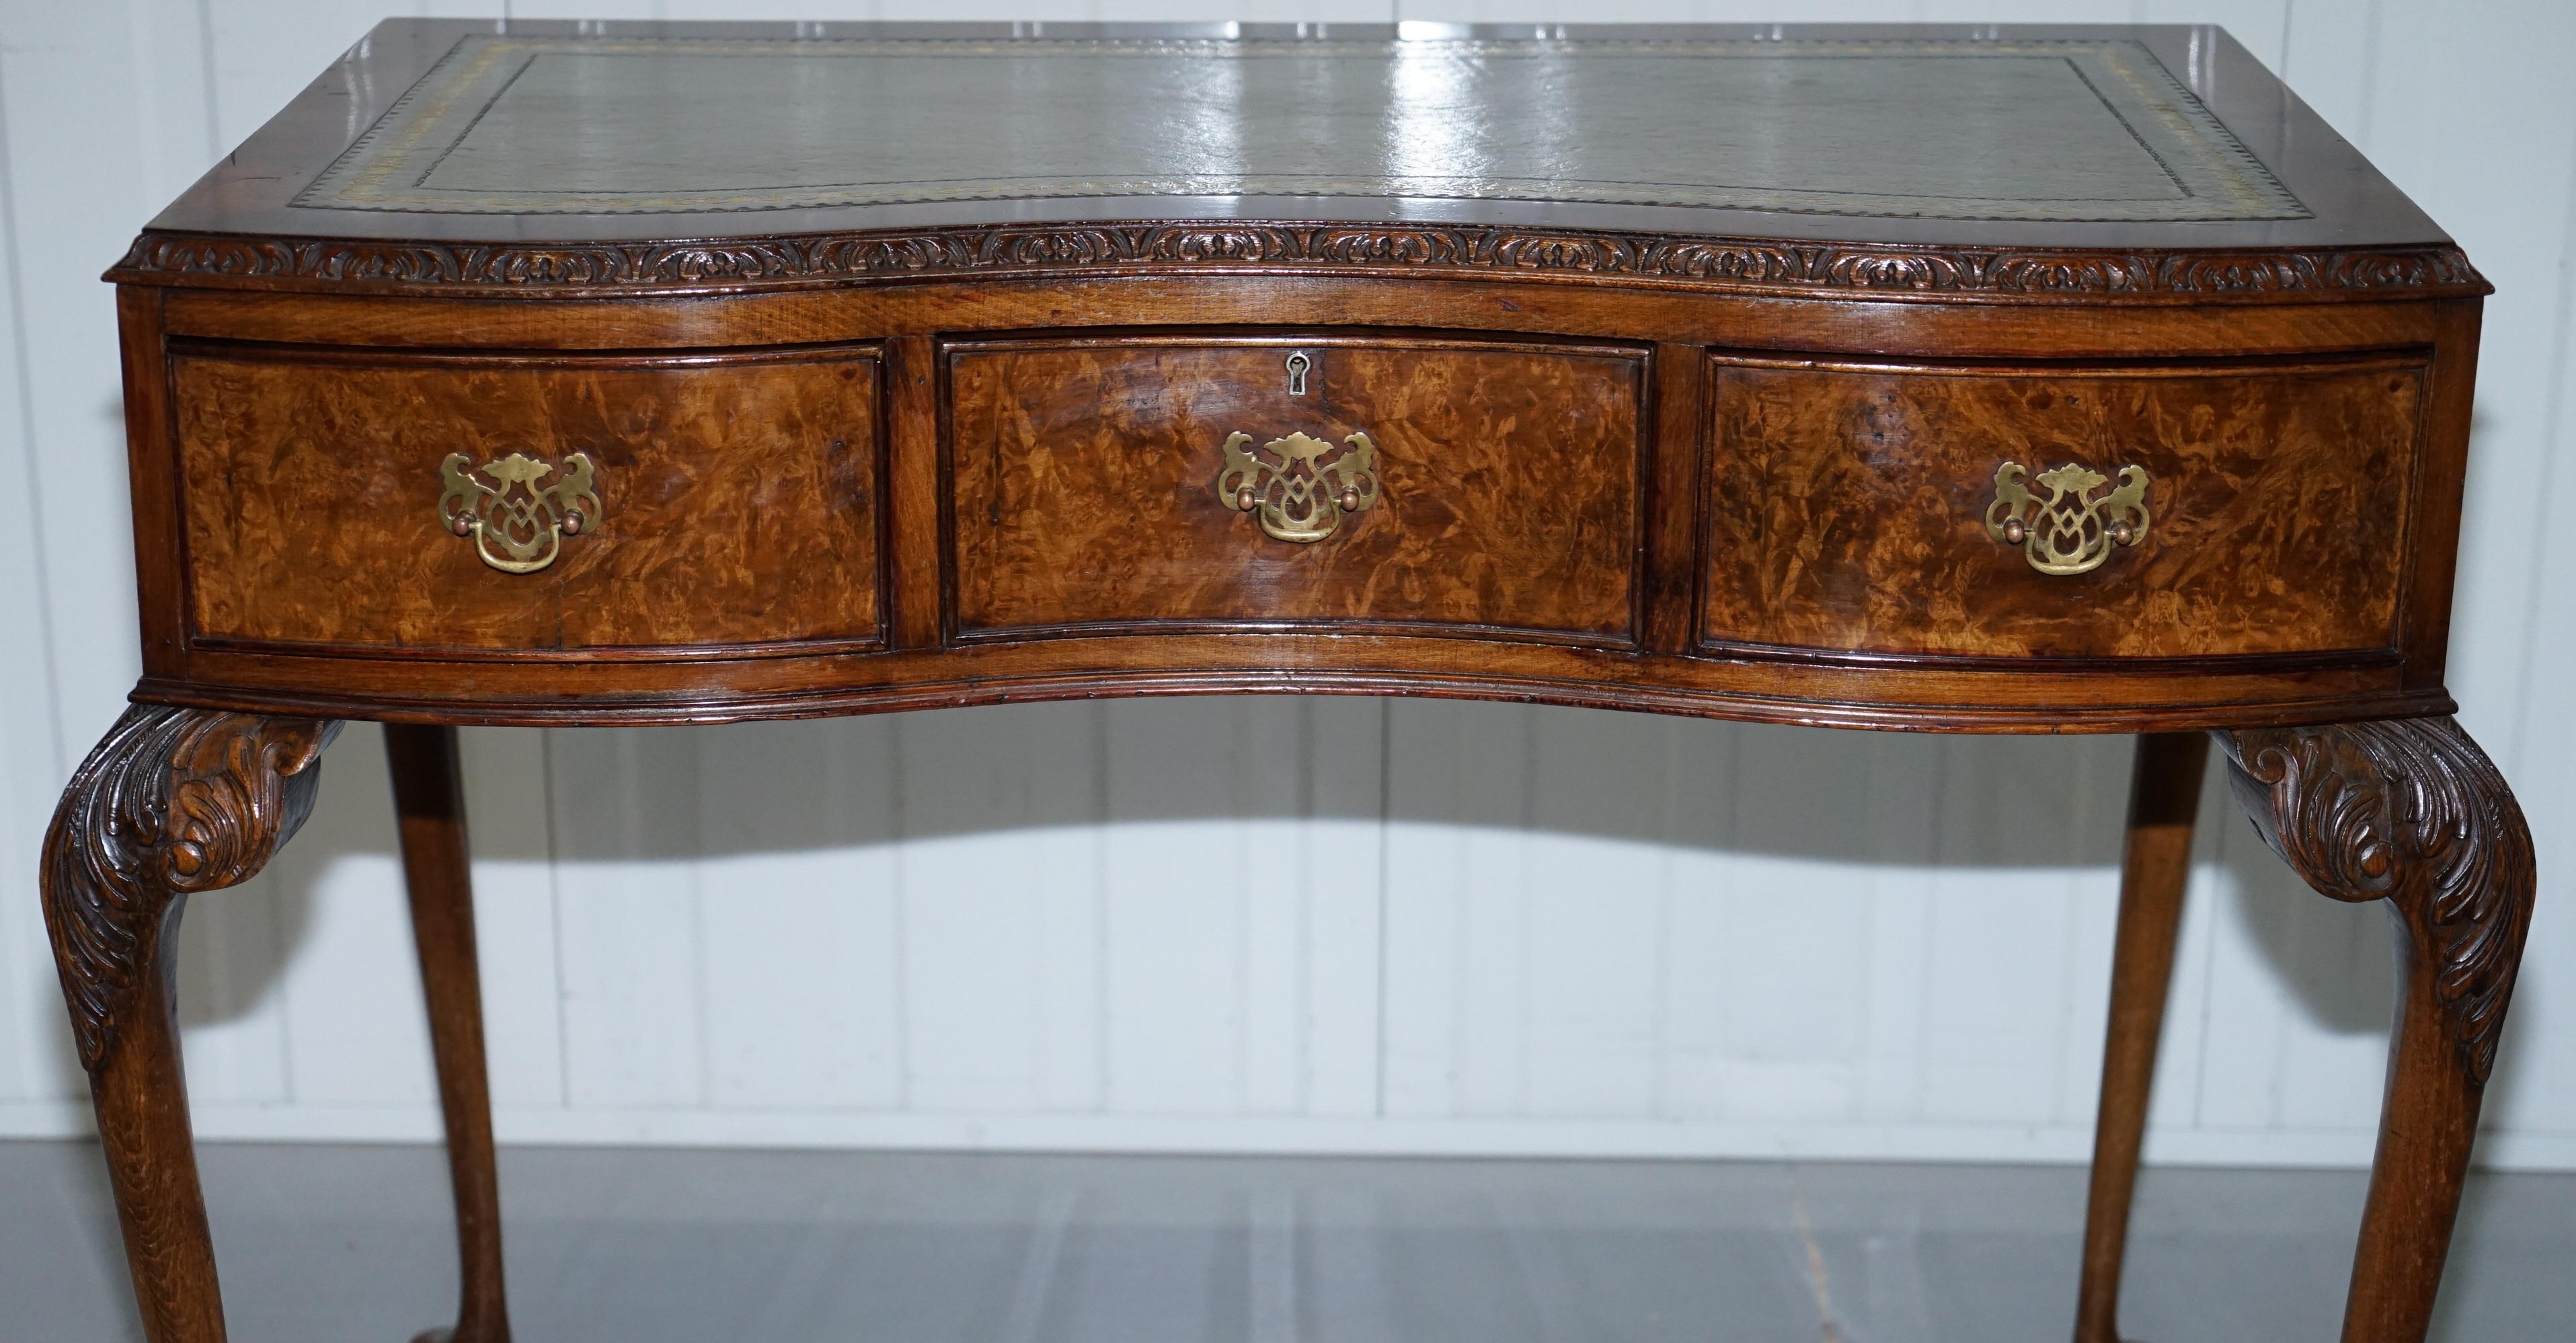 19th Century Stunning Queen Anne Pad Foot Walnut Writing Hall Console Table Desk Leather Top